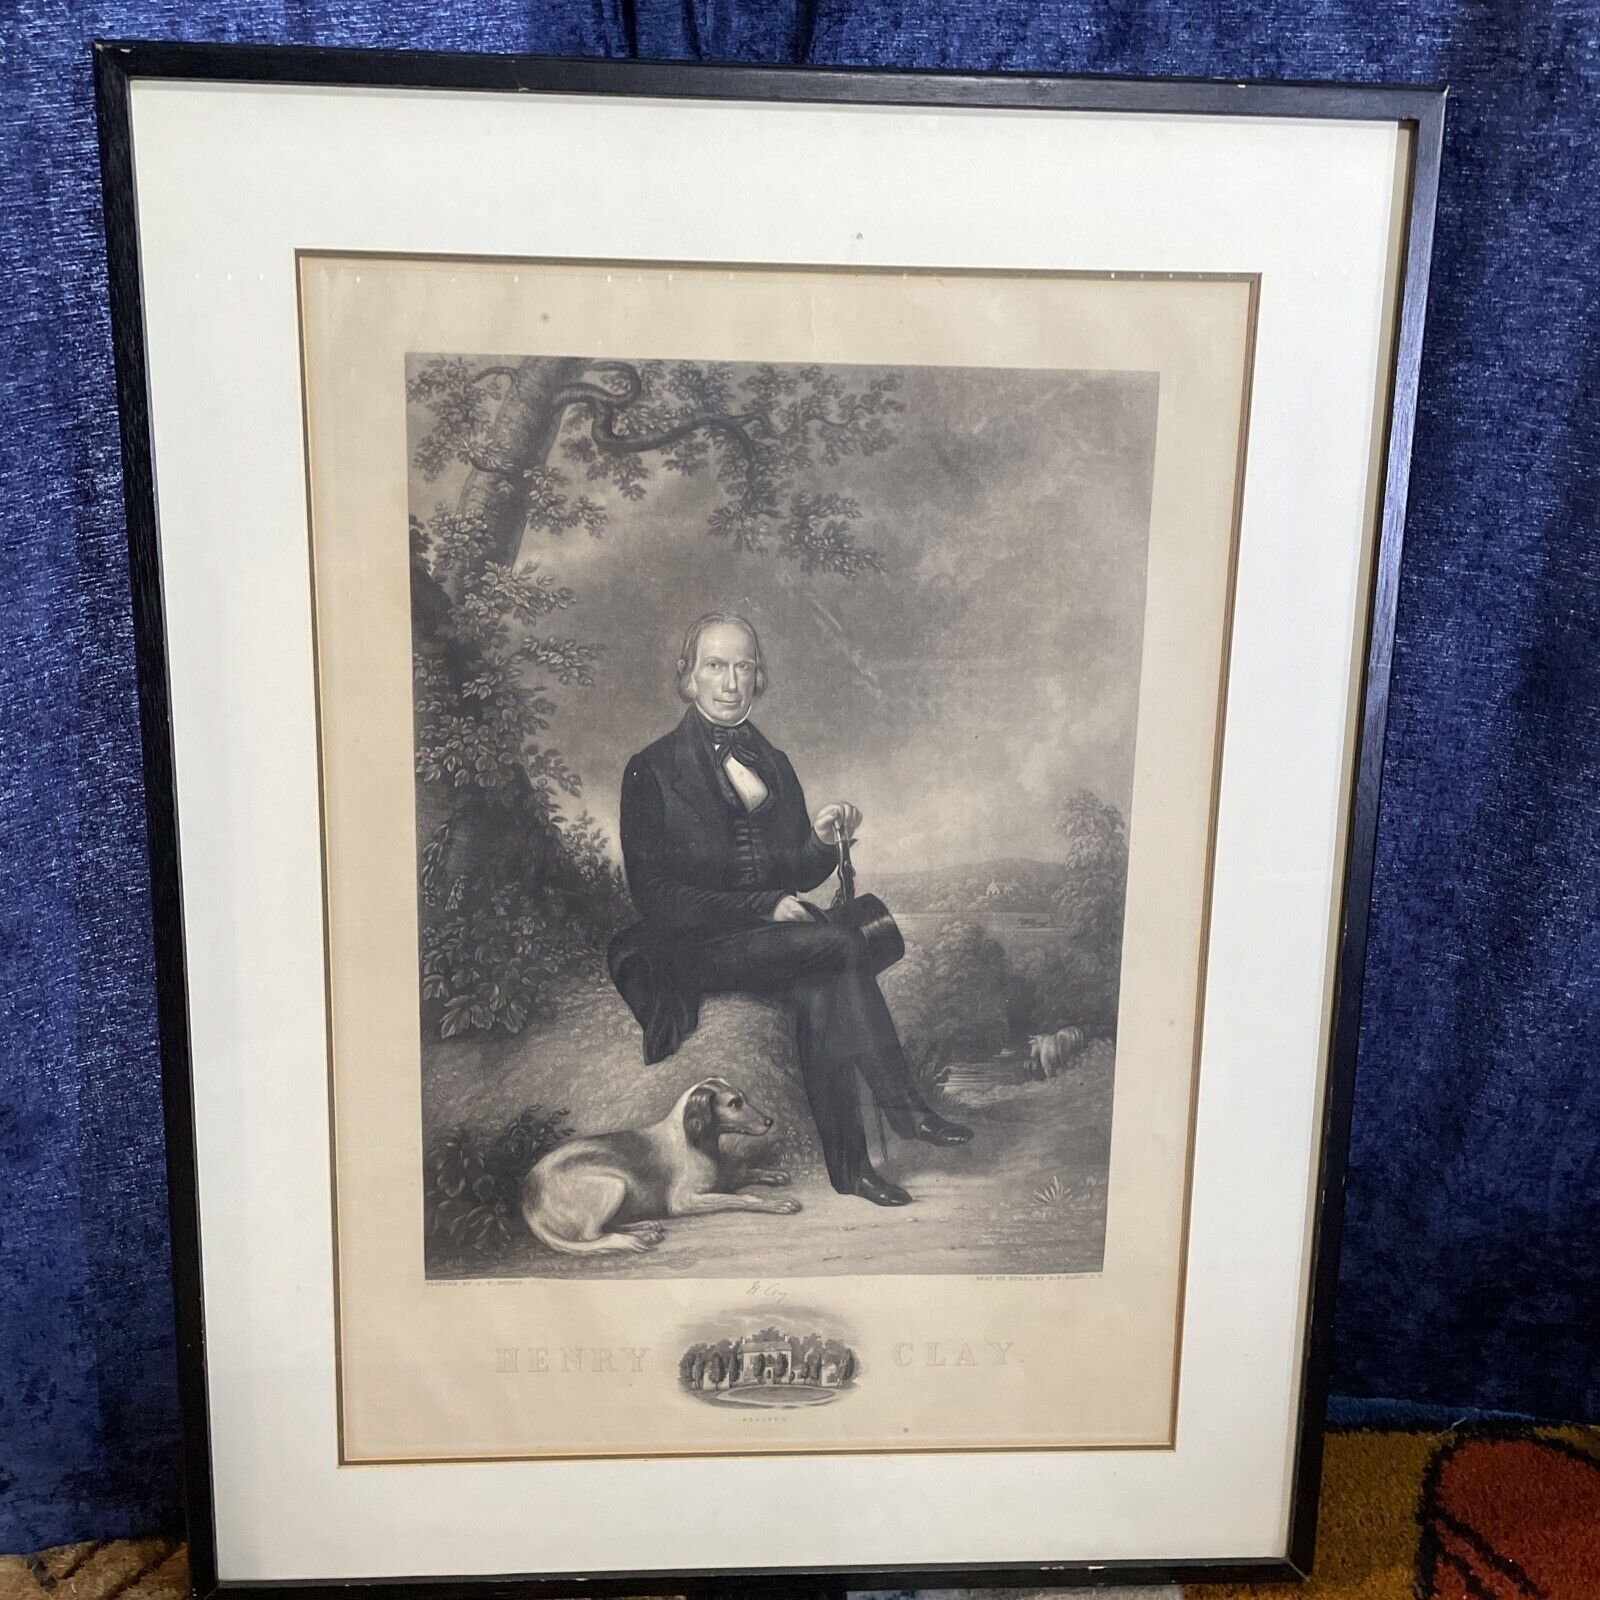 Rare Historical 1843 Henry Clay Engraving By J.W. Dodge, First Printing, Framed.